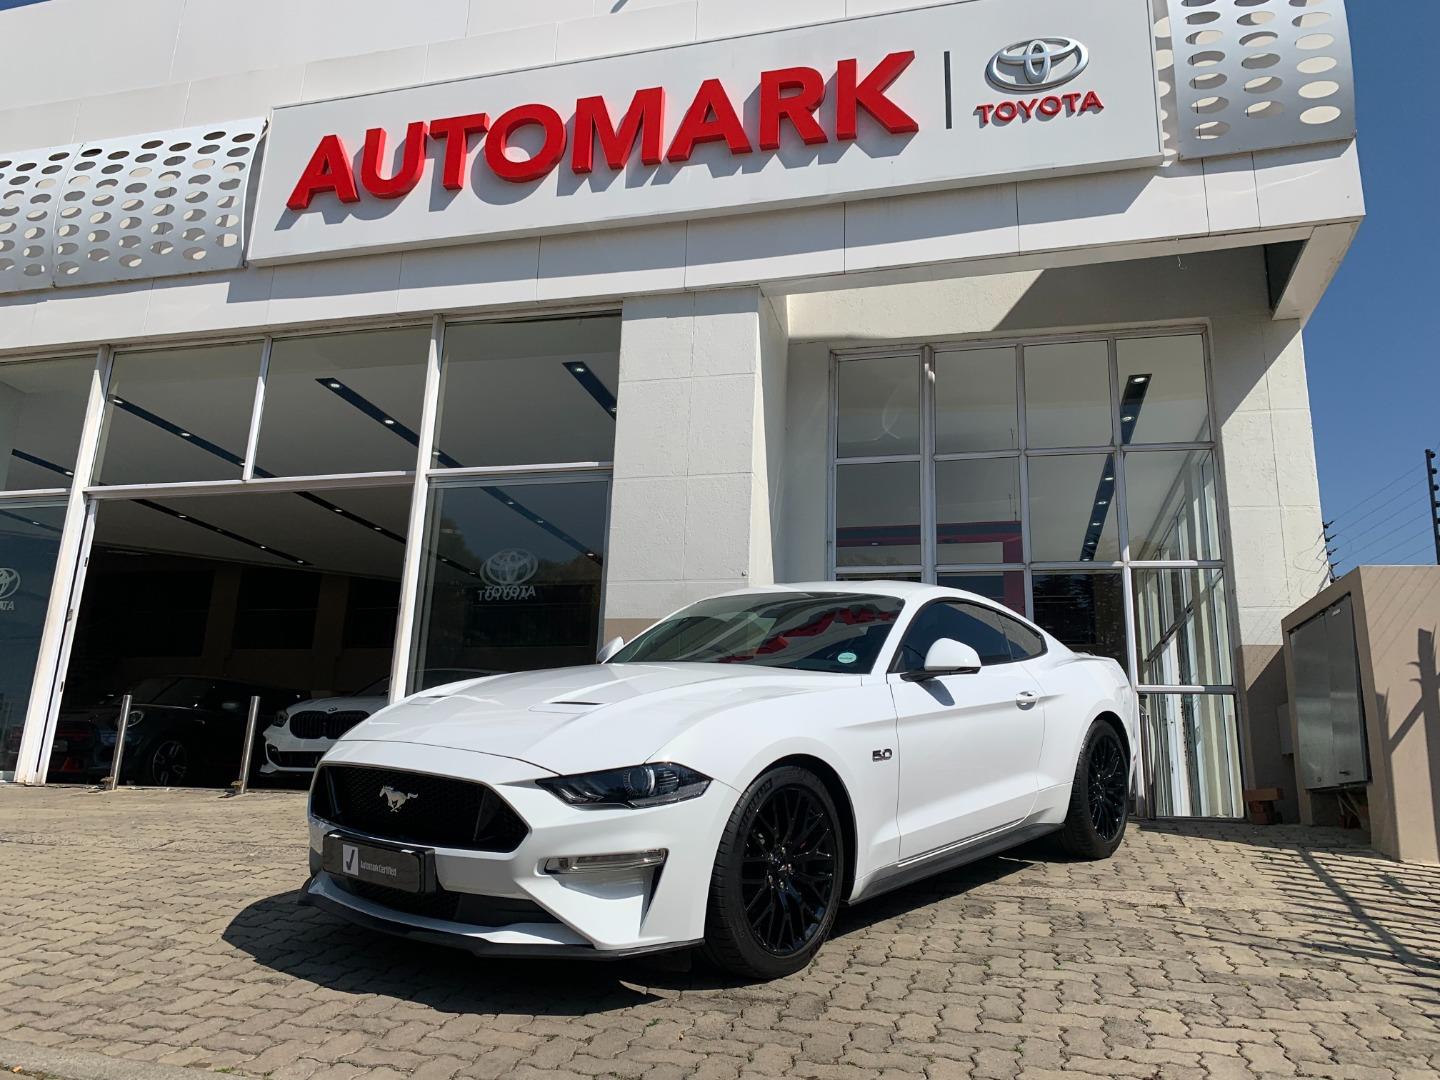 2021 Ford Mustang MY21.11 5.0 Gt Fastback At for sale - 327430